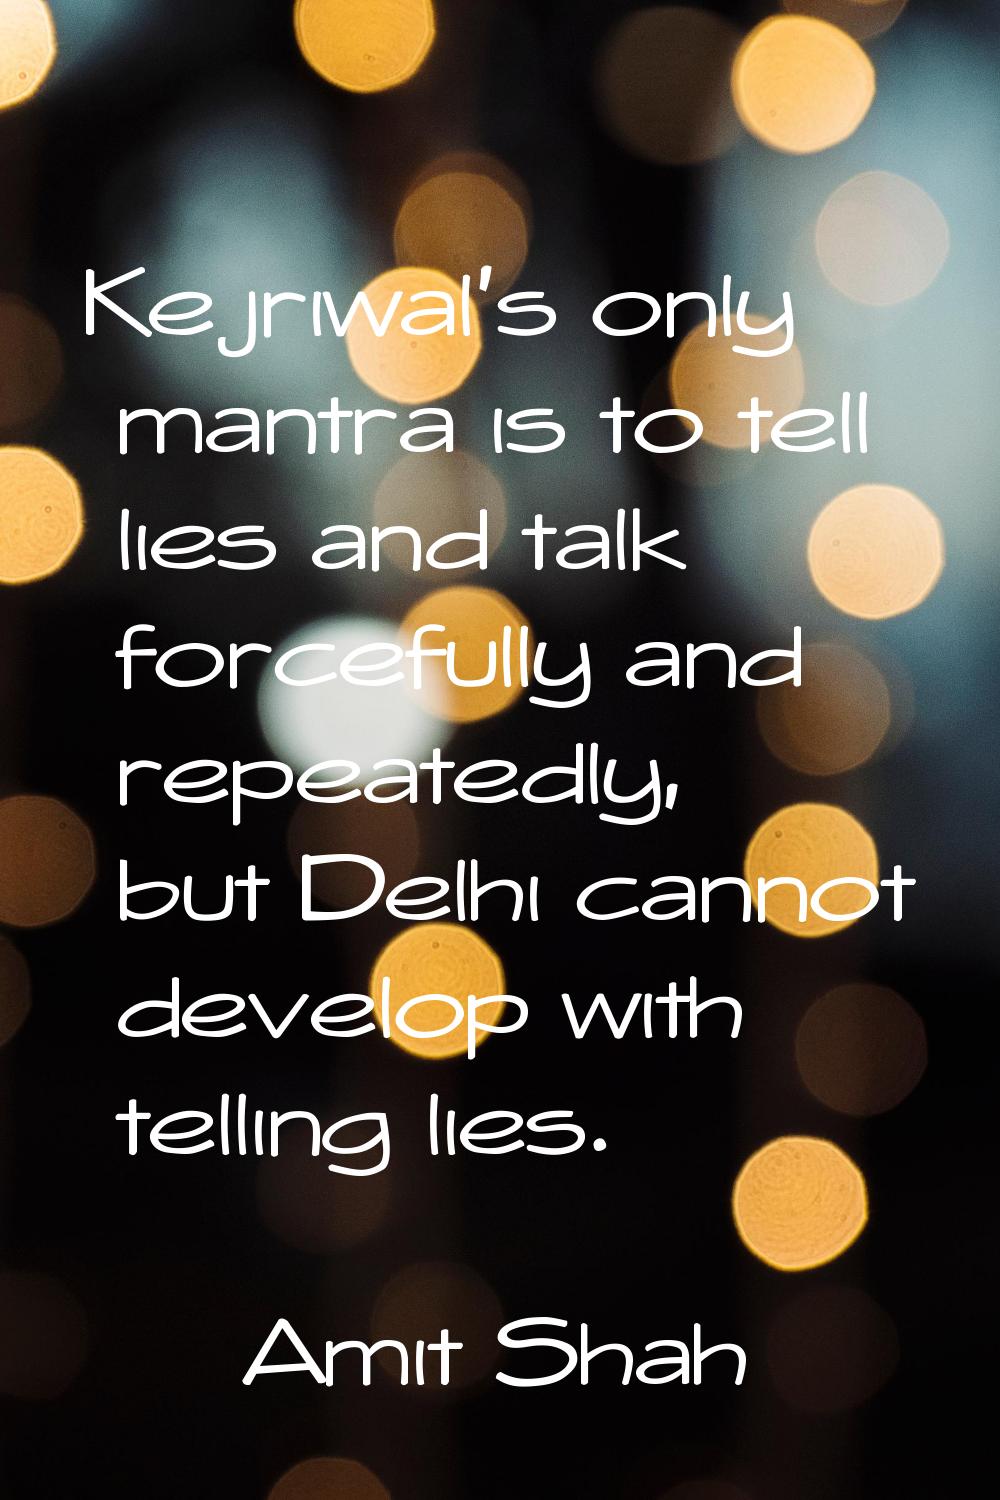 Kejriwal's only mantra is to tell lies and talk forcefully and repeatedly, but Delhi cannot develop